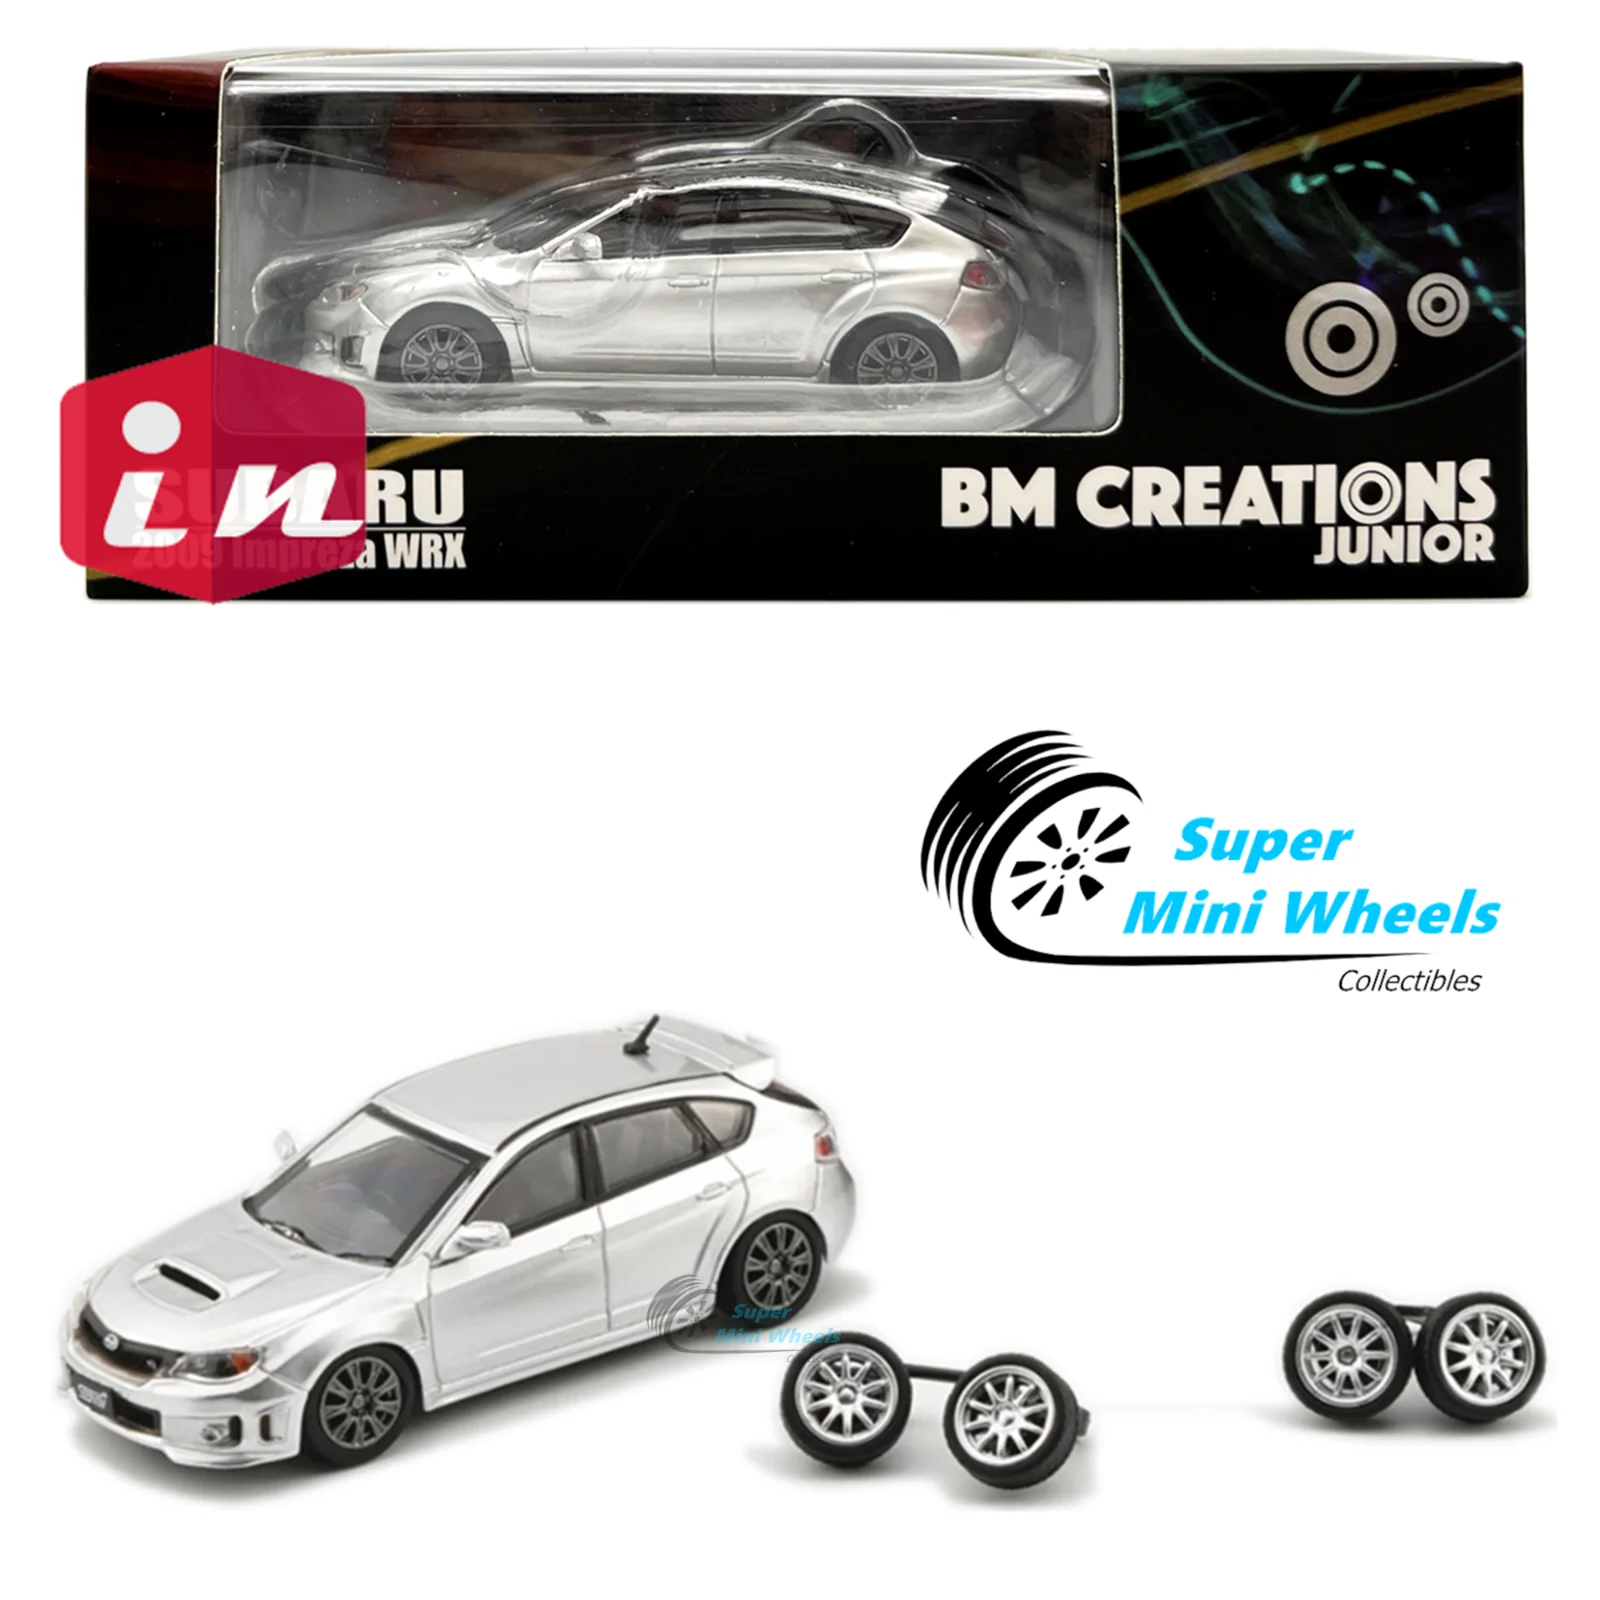 

BM Creations 1:64 - 2009 Impreza WRX (Silver) with Accessories DieCast Model Car Collection Limited Edition Hobby Toy Car